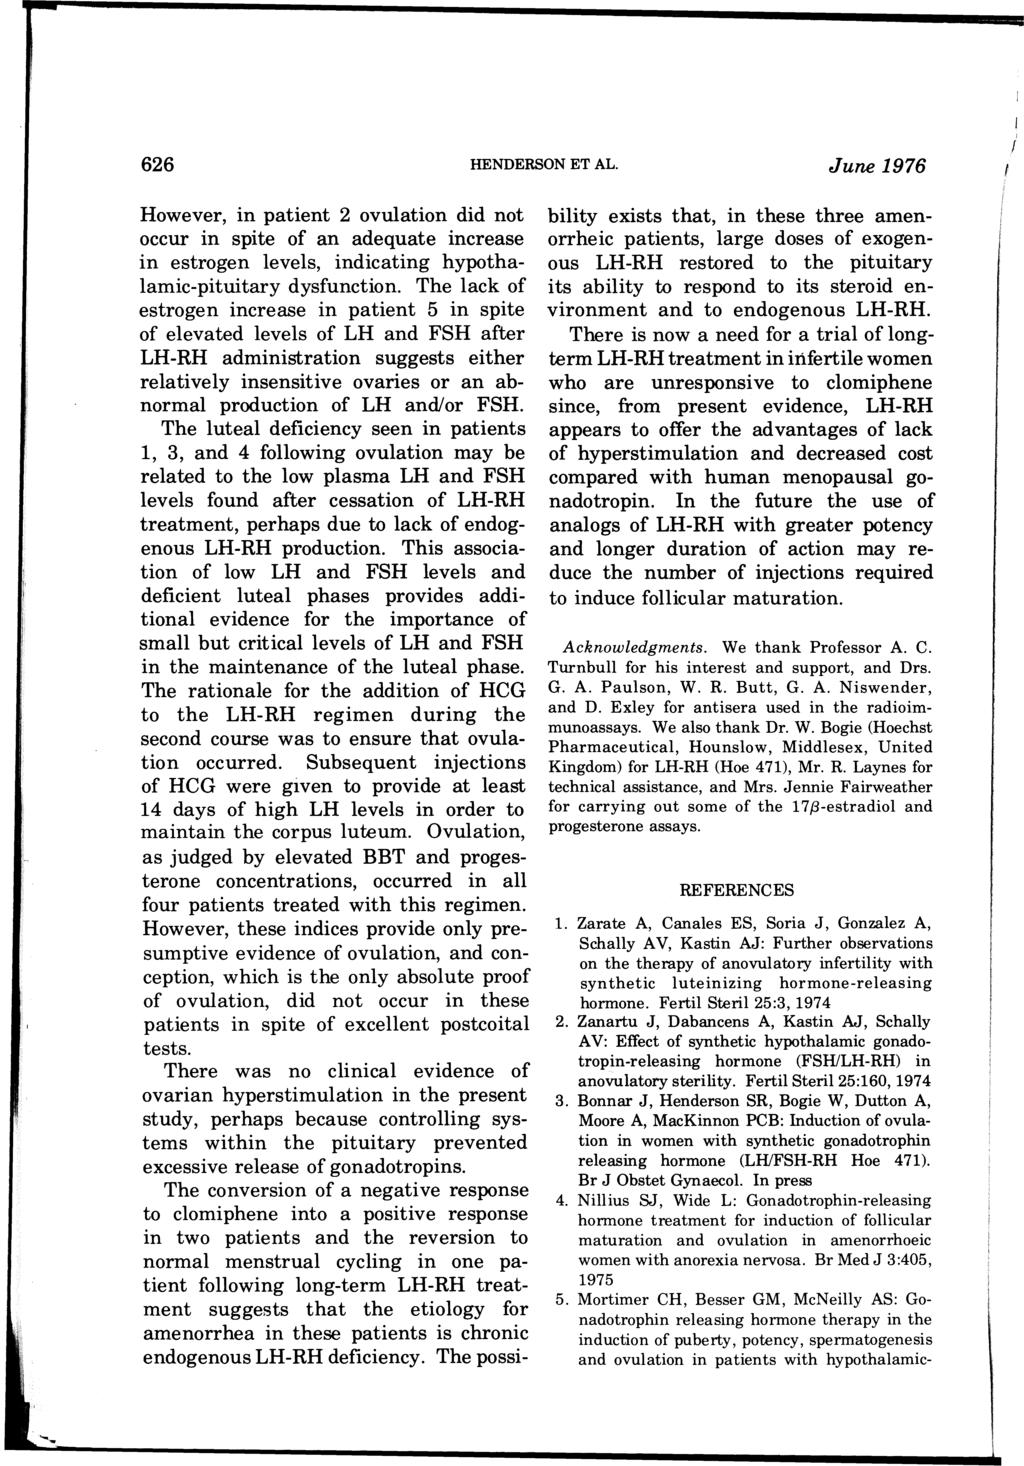 626 HENDERSON ET AL. June 1976 However, in patient 2 ovulation did not occur in spite of an adequate increase in estrogen levels, indicating hypothalamic-pituitary dysfunction.